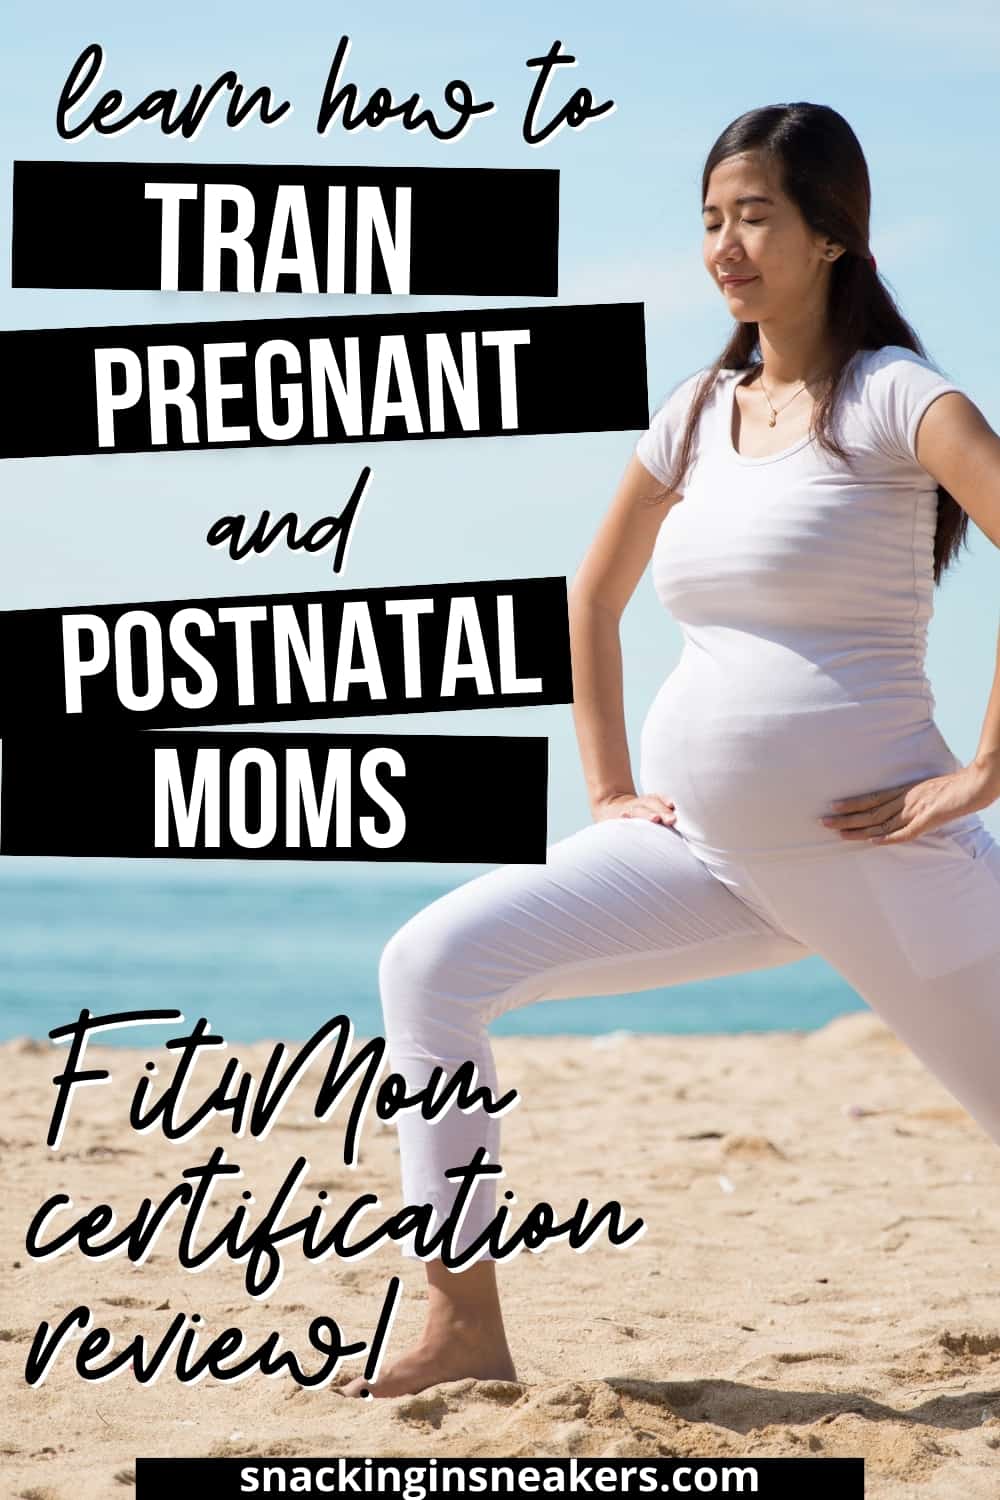 A pregnant mom doing a lunge on the beach, with a text overlay that says learn how to train pregnant and postnatal moms.